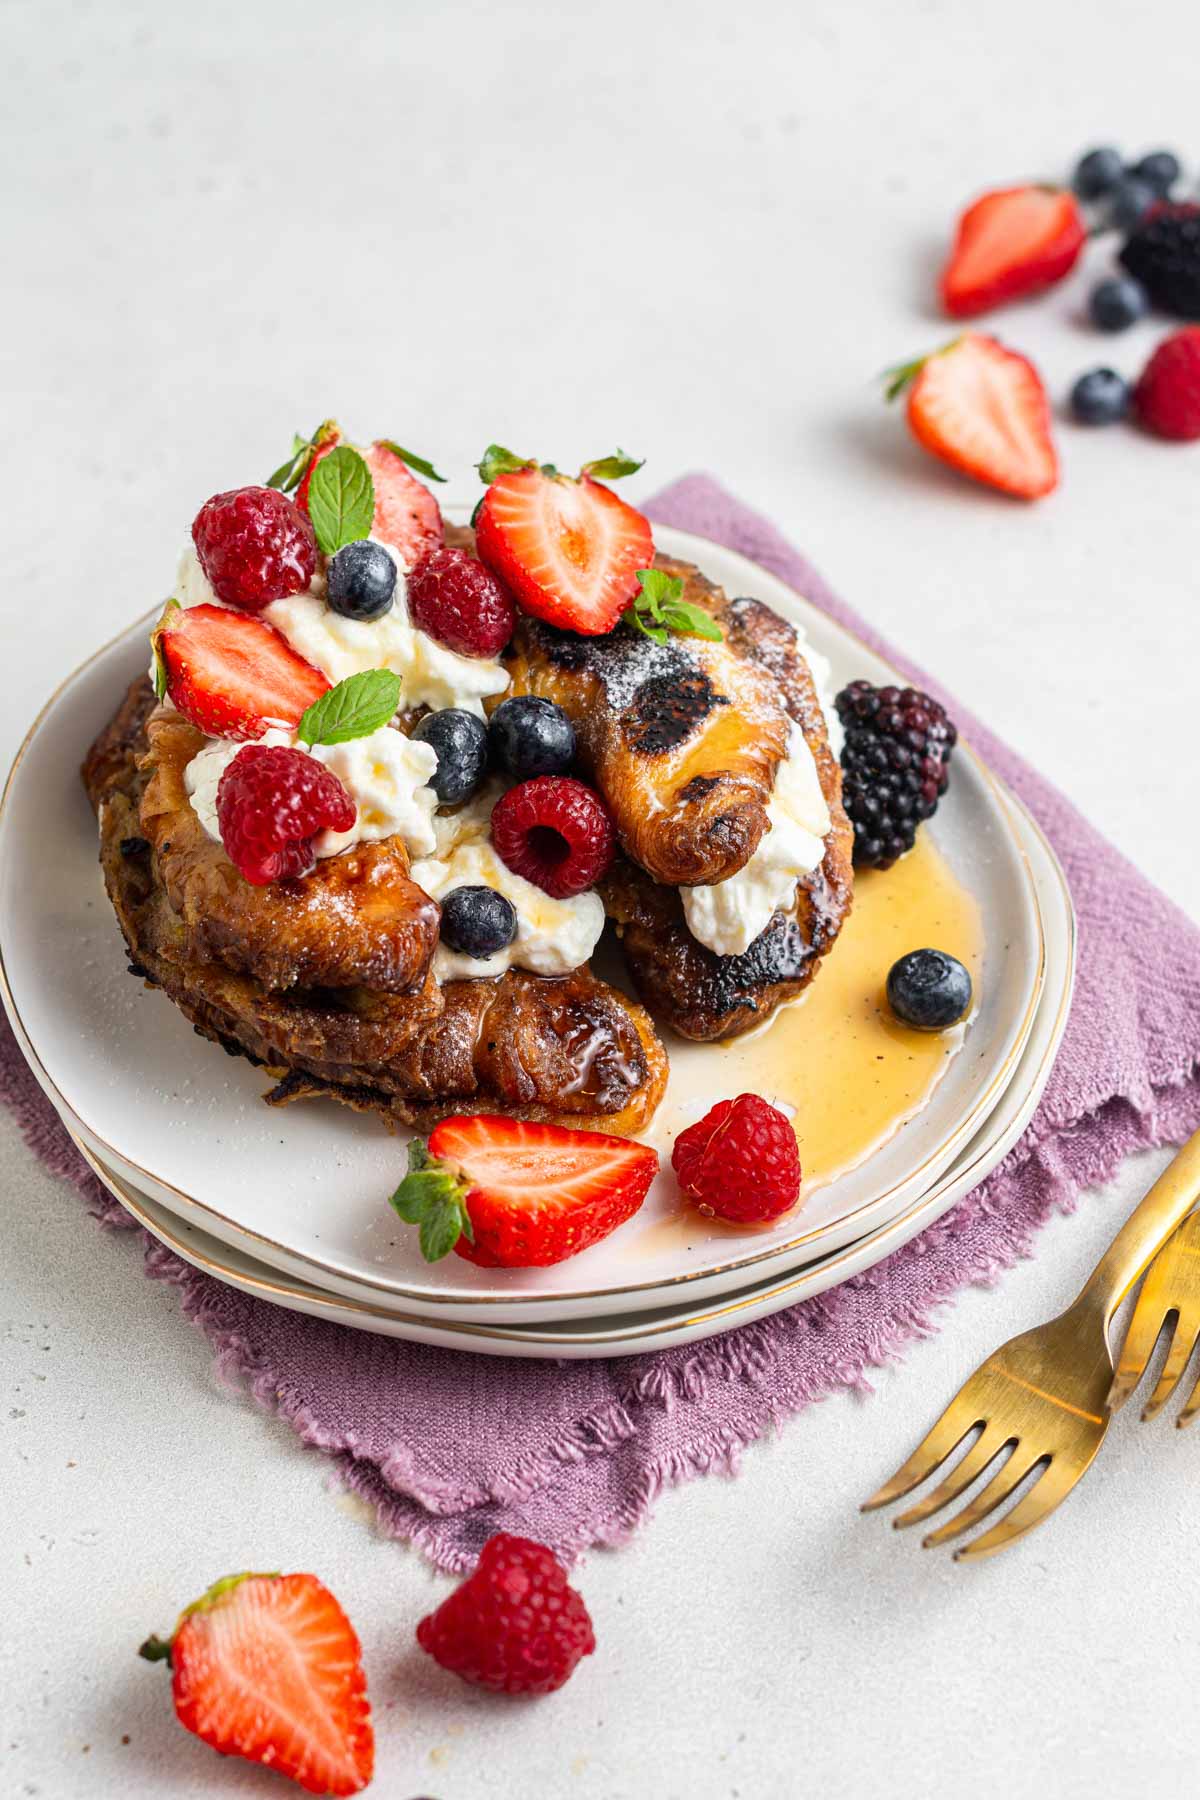 Croissant French toast with whipped cream and fresh berries.